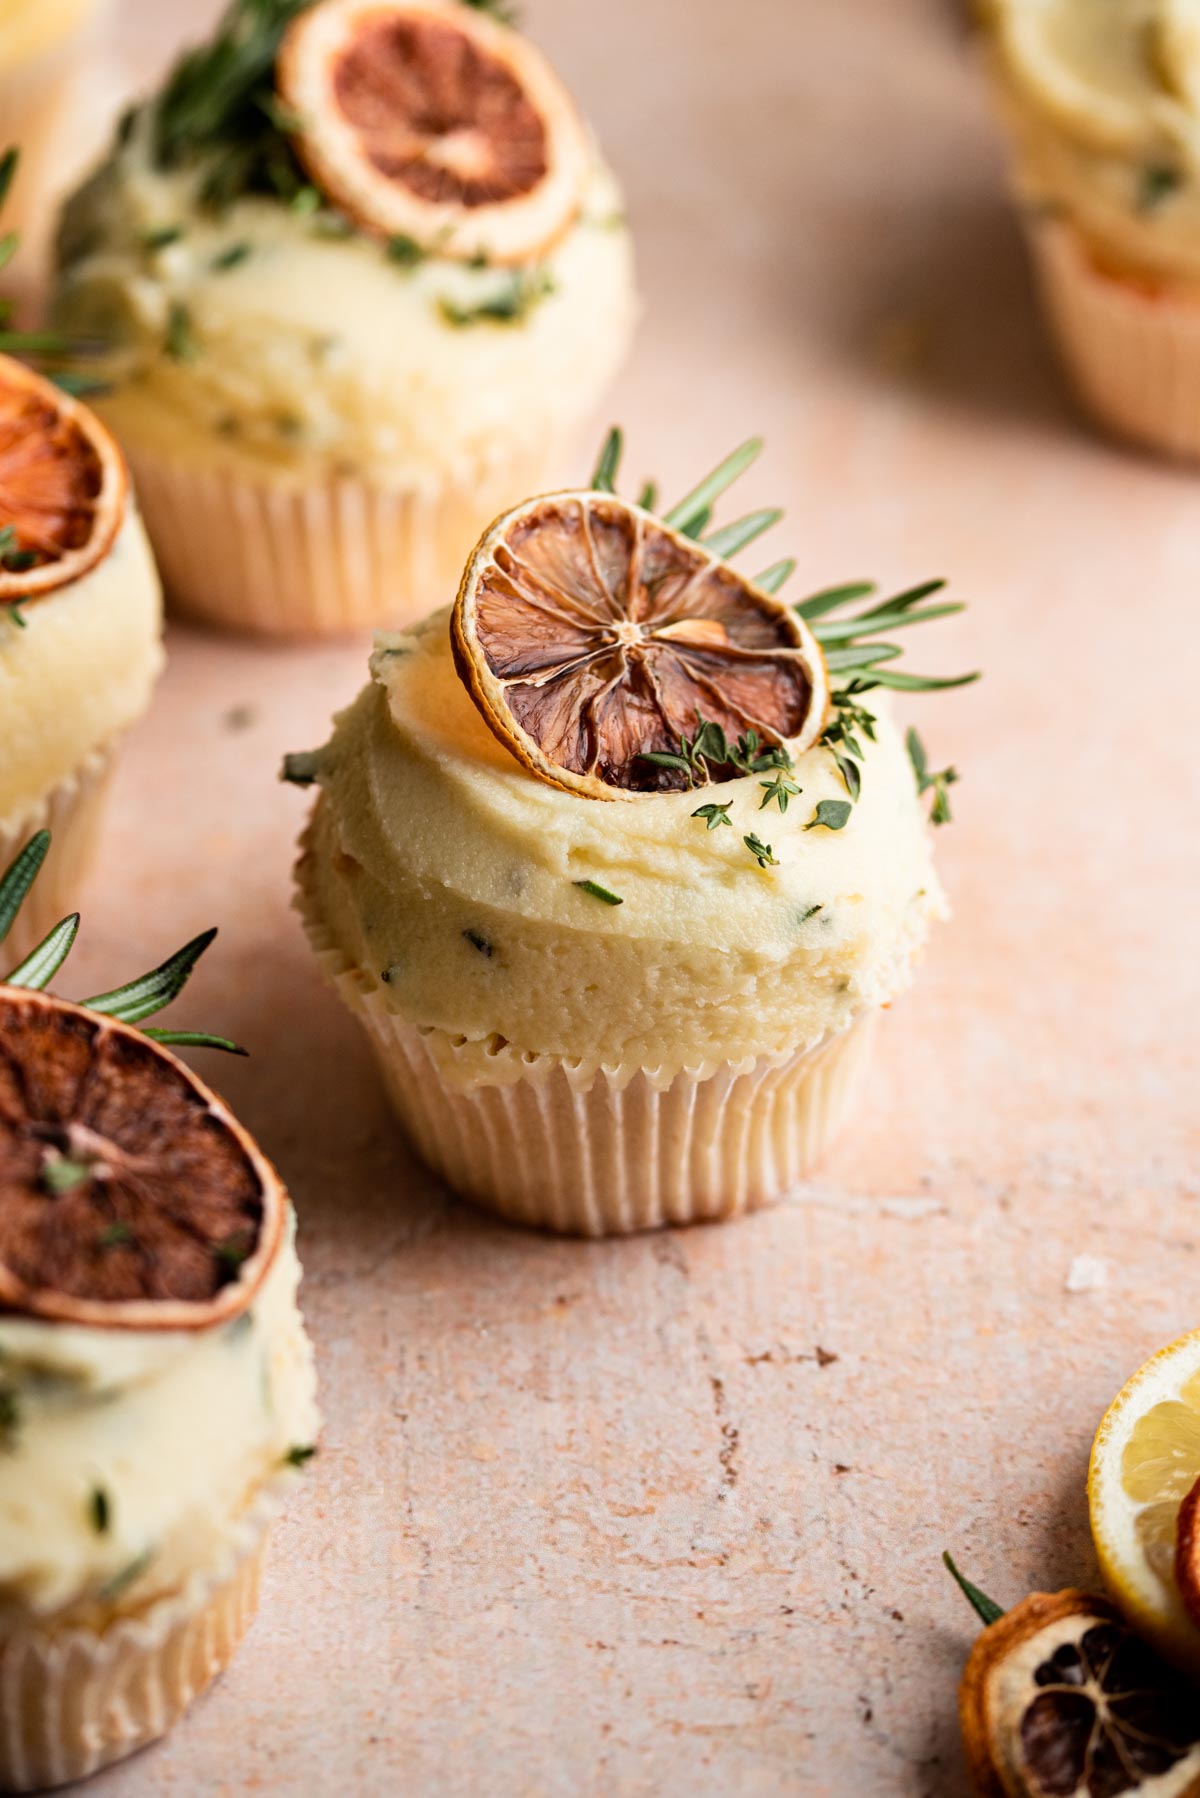 Lemon cupcake decorated with rosemary dried lemon slices on a brown table.